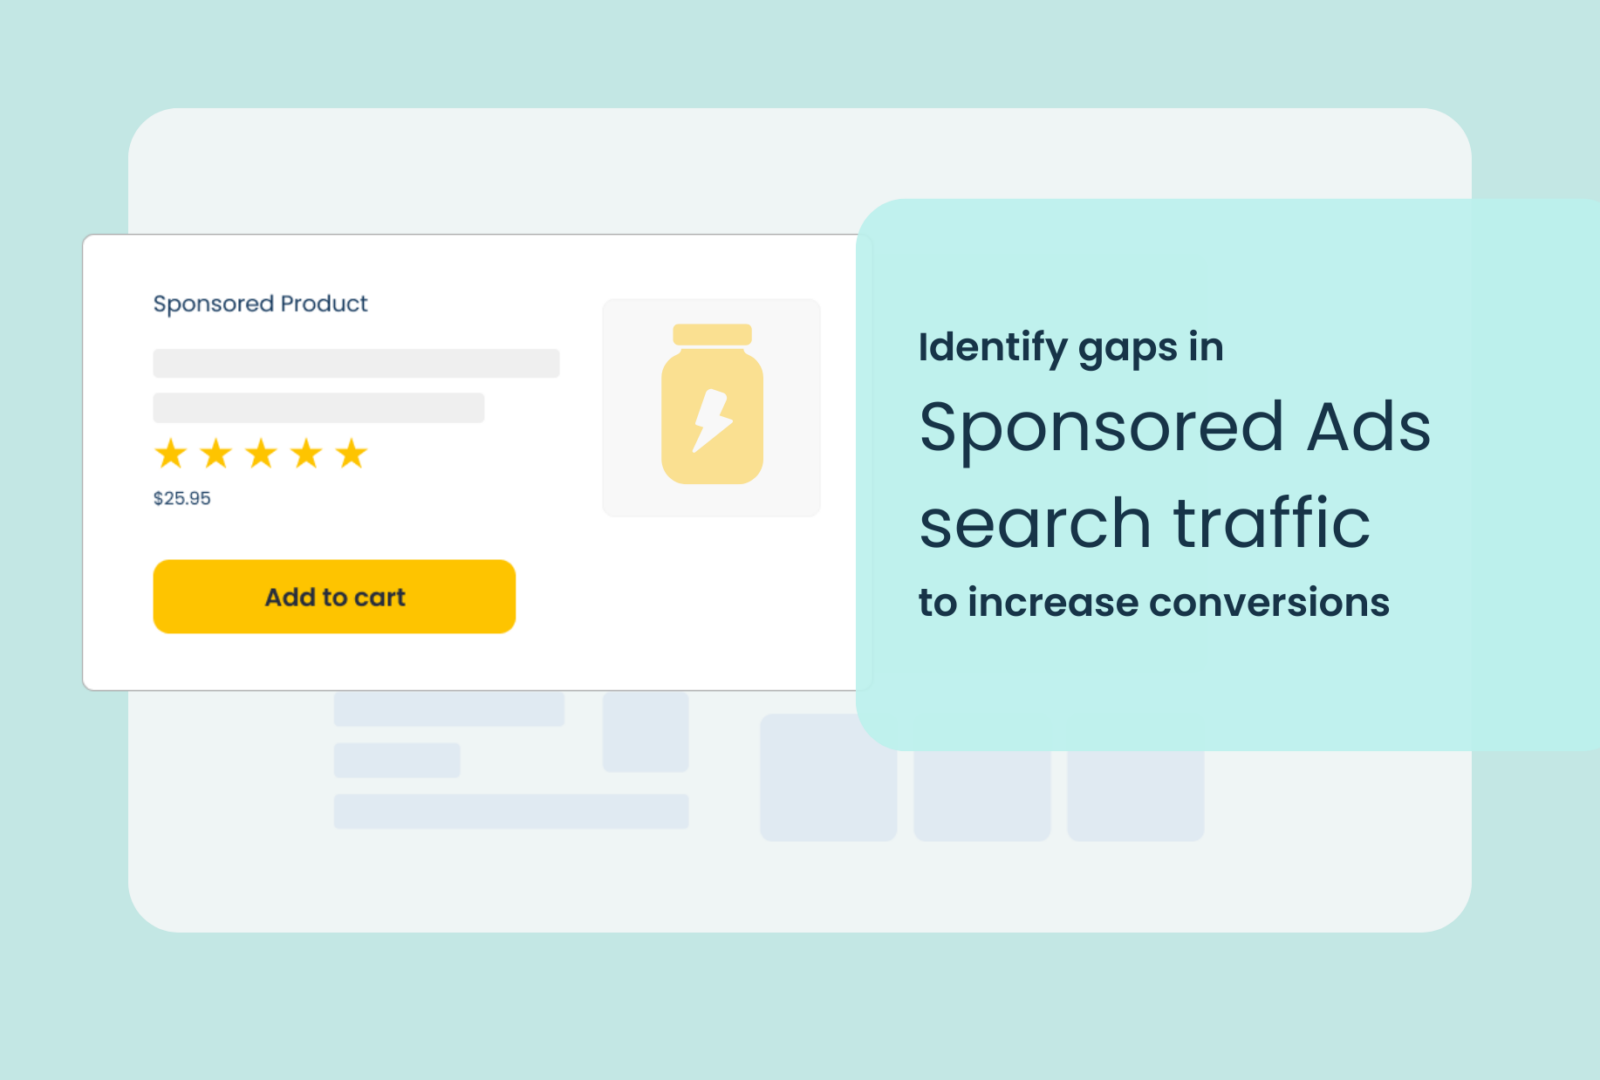 sponsored search traffic ads, identify gaps to increase conversions